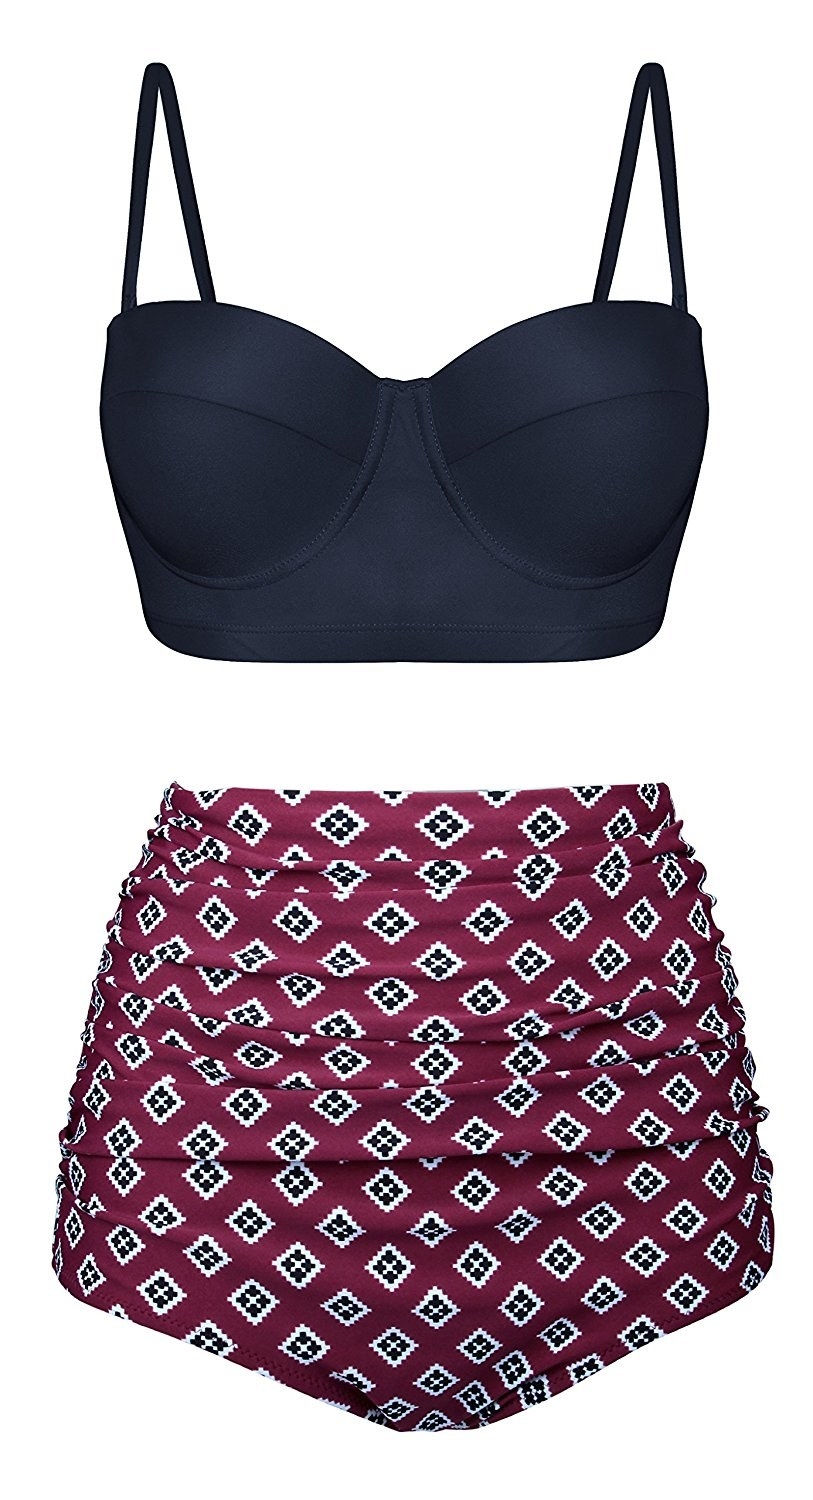 35 Amazingly Beautiful Swimsuits You Can Get For Under $50